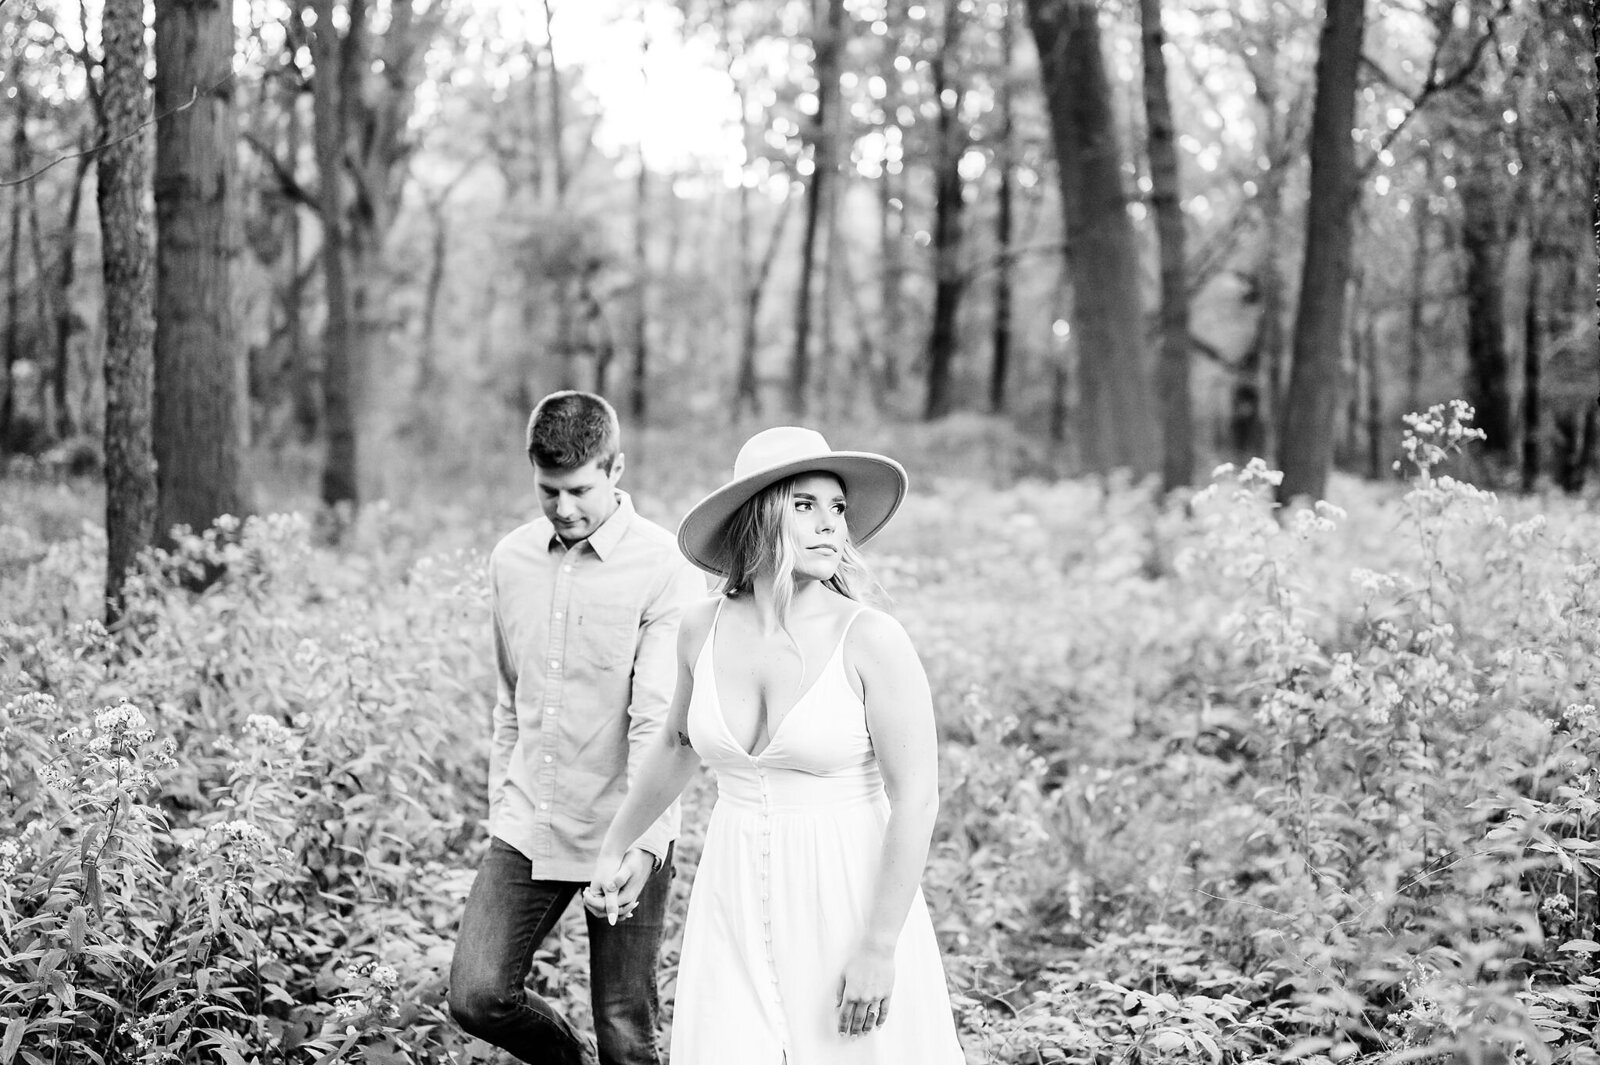 Engaged-couple-walking-through-the-forest-as-the-girl-looks-off-with-her-wide-brimmed-hat